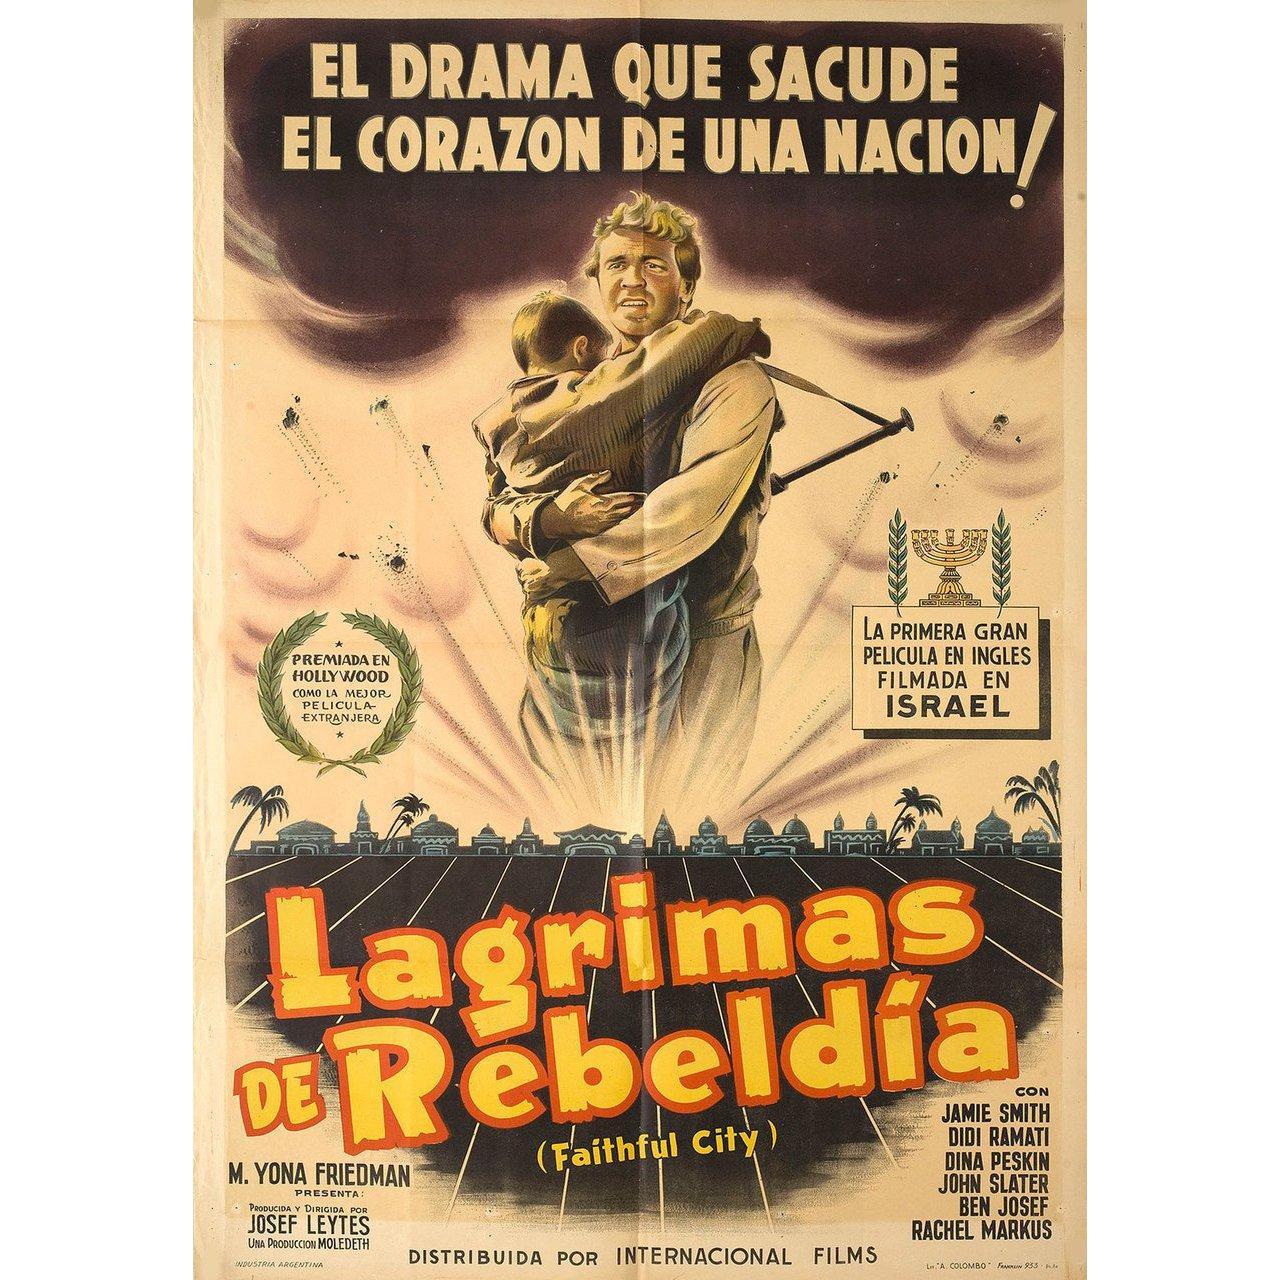 Original 1952 Argentine poster for the film The Faithful City directed by Joseph Lejtes with Jamie Smith / Ben Josef / John Slater / Rahel Marcus. Very good-fine condition, folded. Many original posters were issued folded or were subsequently